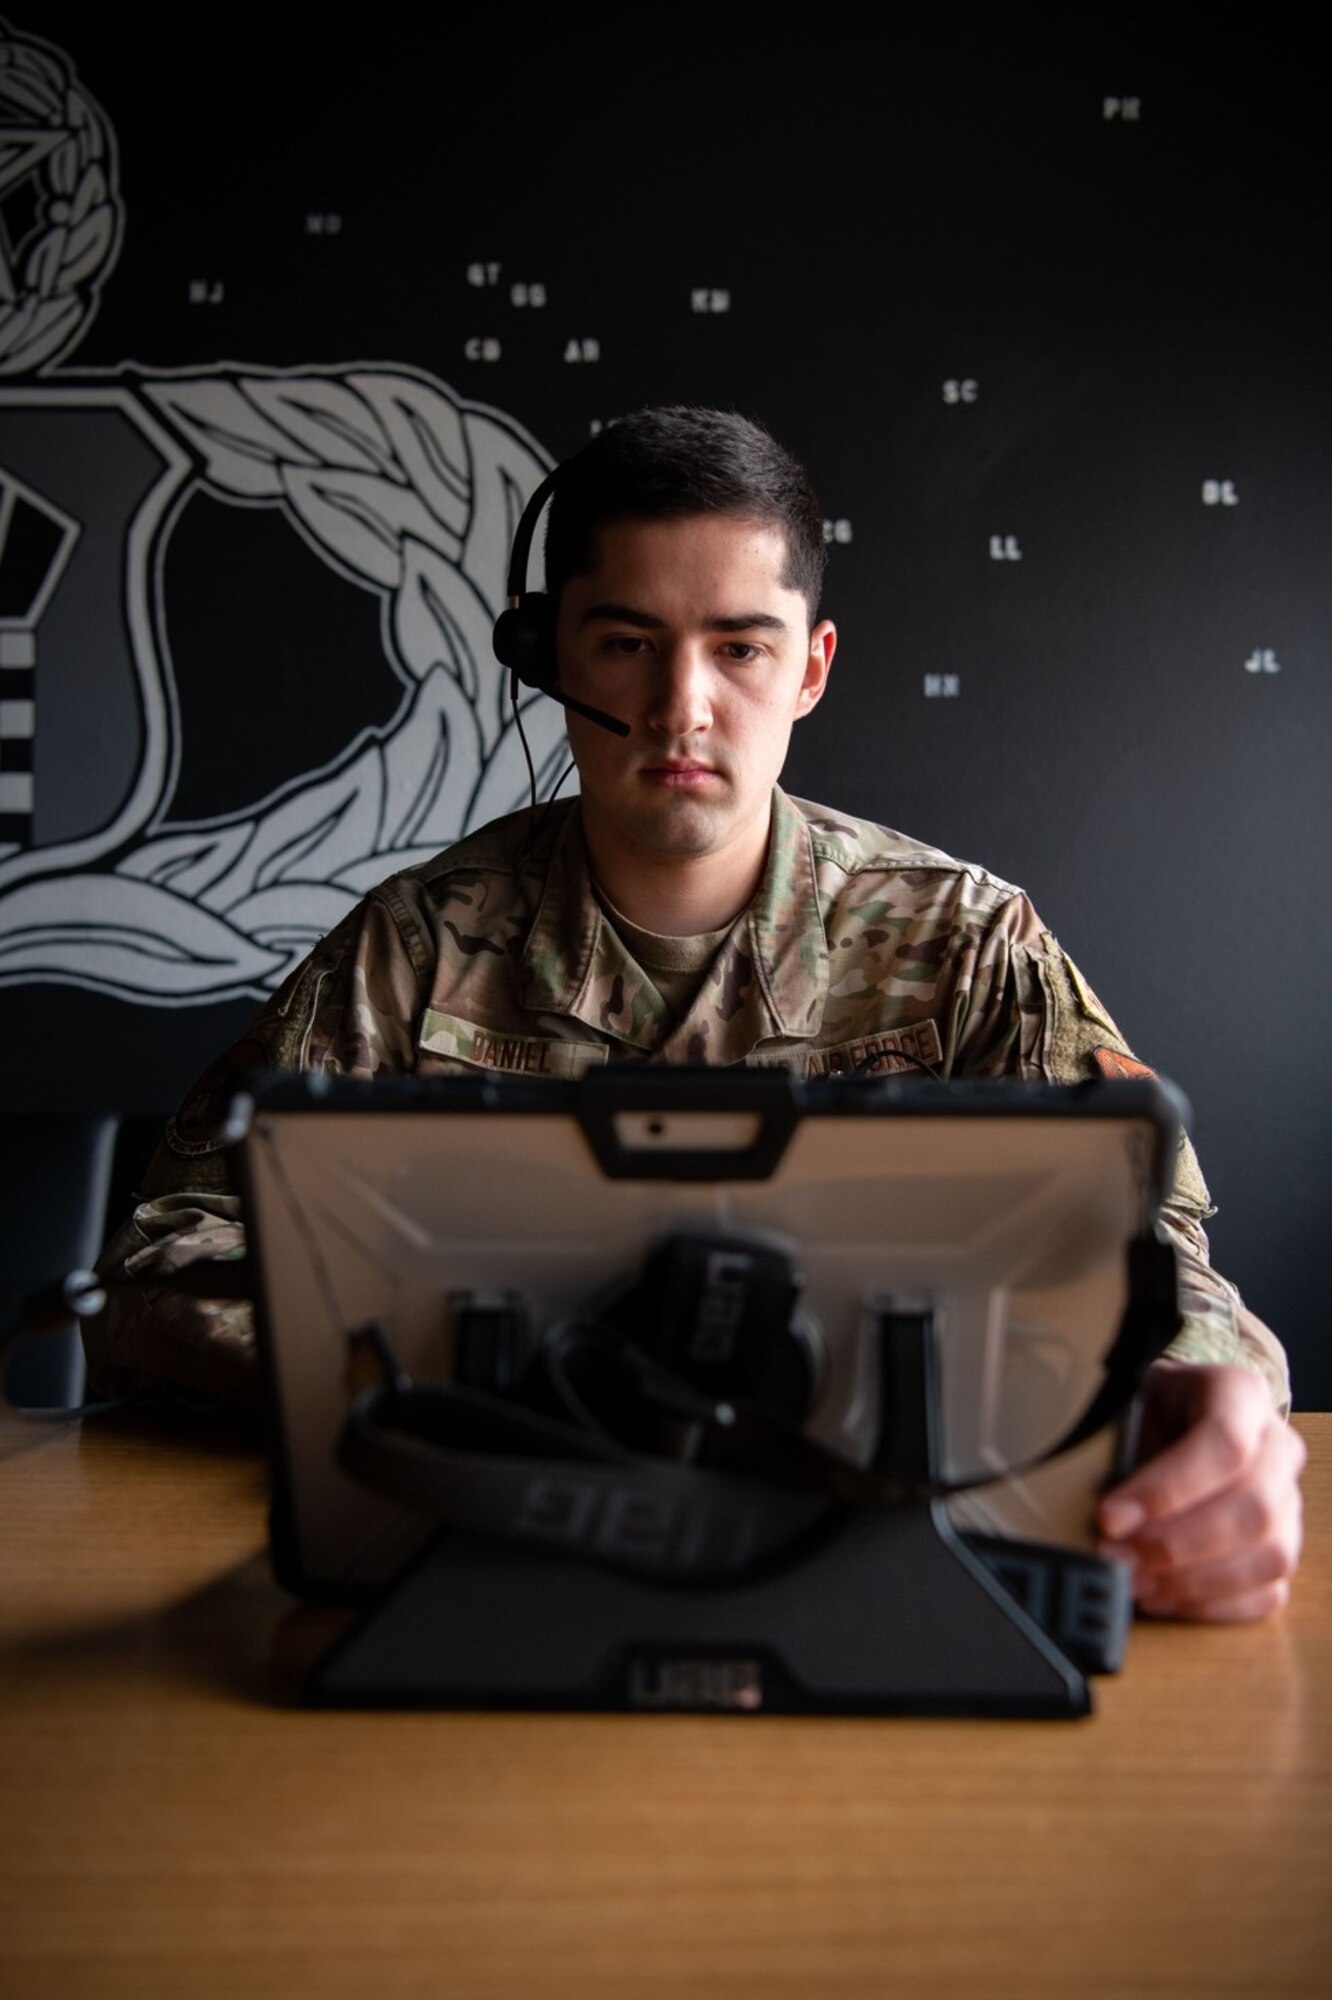 Senior Airman Christopher Daniel, a 28th Operation Support Squadron air traffic control (ATC) trainer, uses the new ATC cloud-based training system at Ellsworth Air Force Base, S.D., April 15, 2021.